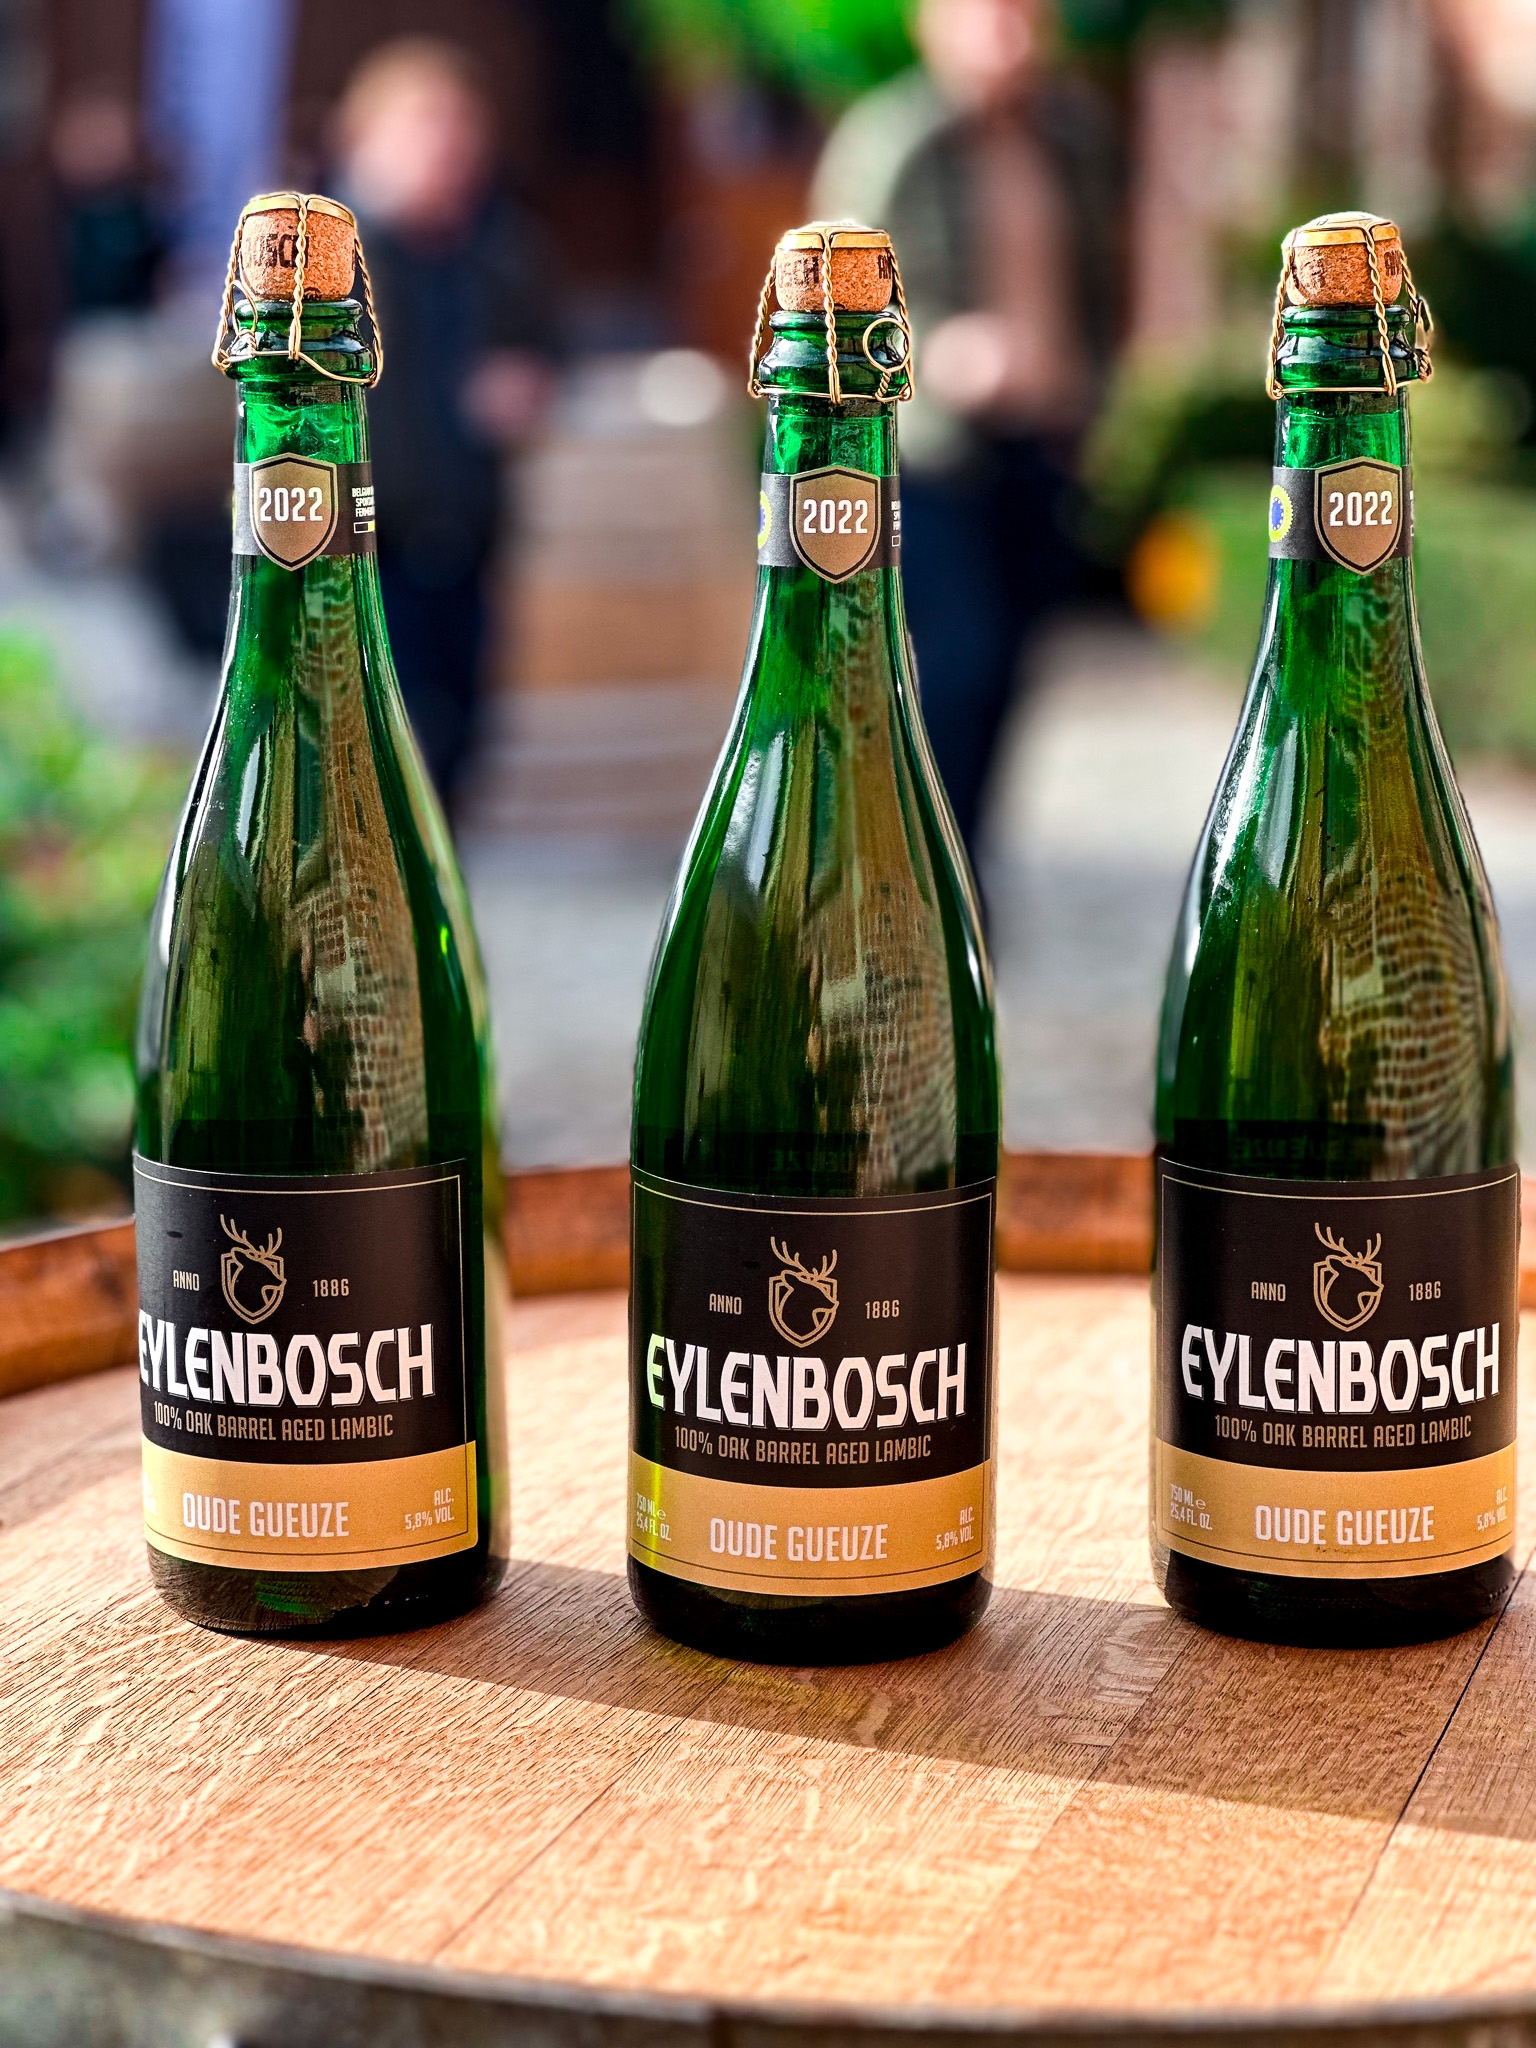 THE WAIT IS OVER … AFTER MORE THAN FOUR YEARS, WE LAUNCH OUR FIRST OUDE GUEUZE WITH 100% EYLENBOSCH LAMBIC